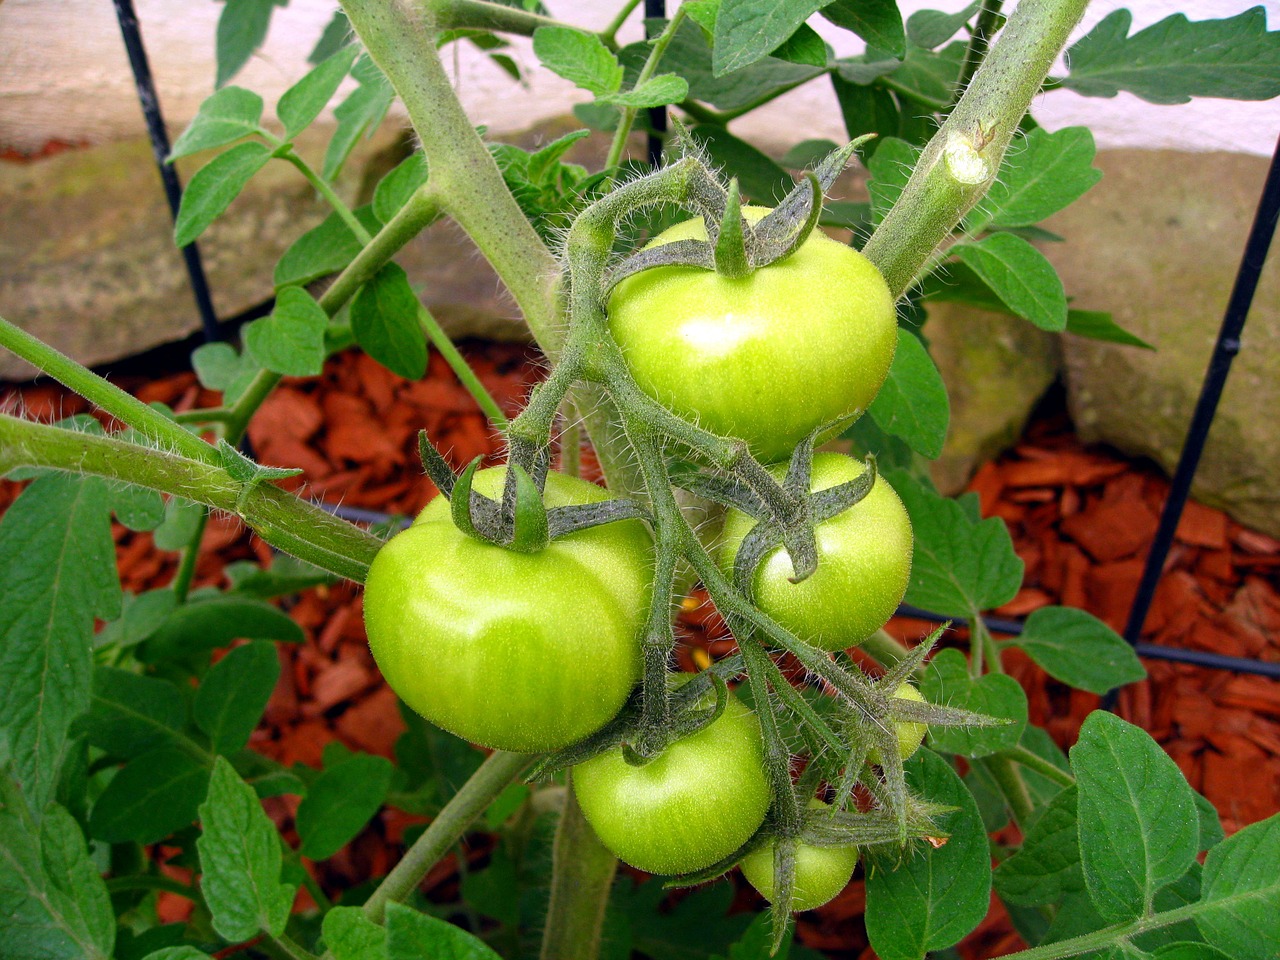 Growing Cherokee Purple Tomatoes in Earthboxes: Tips for High Yields and Quality Taste